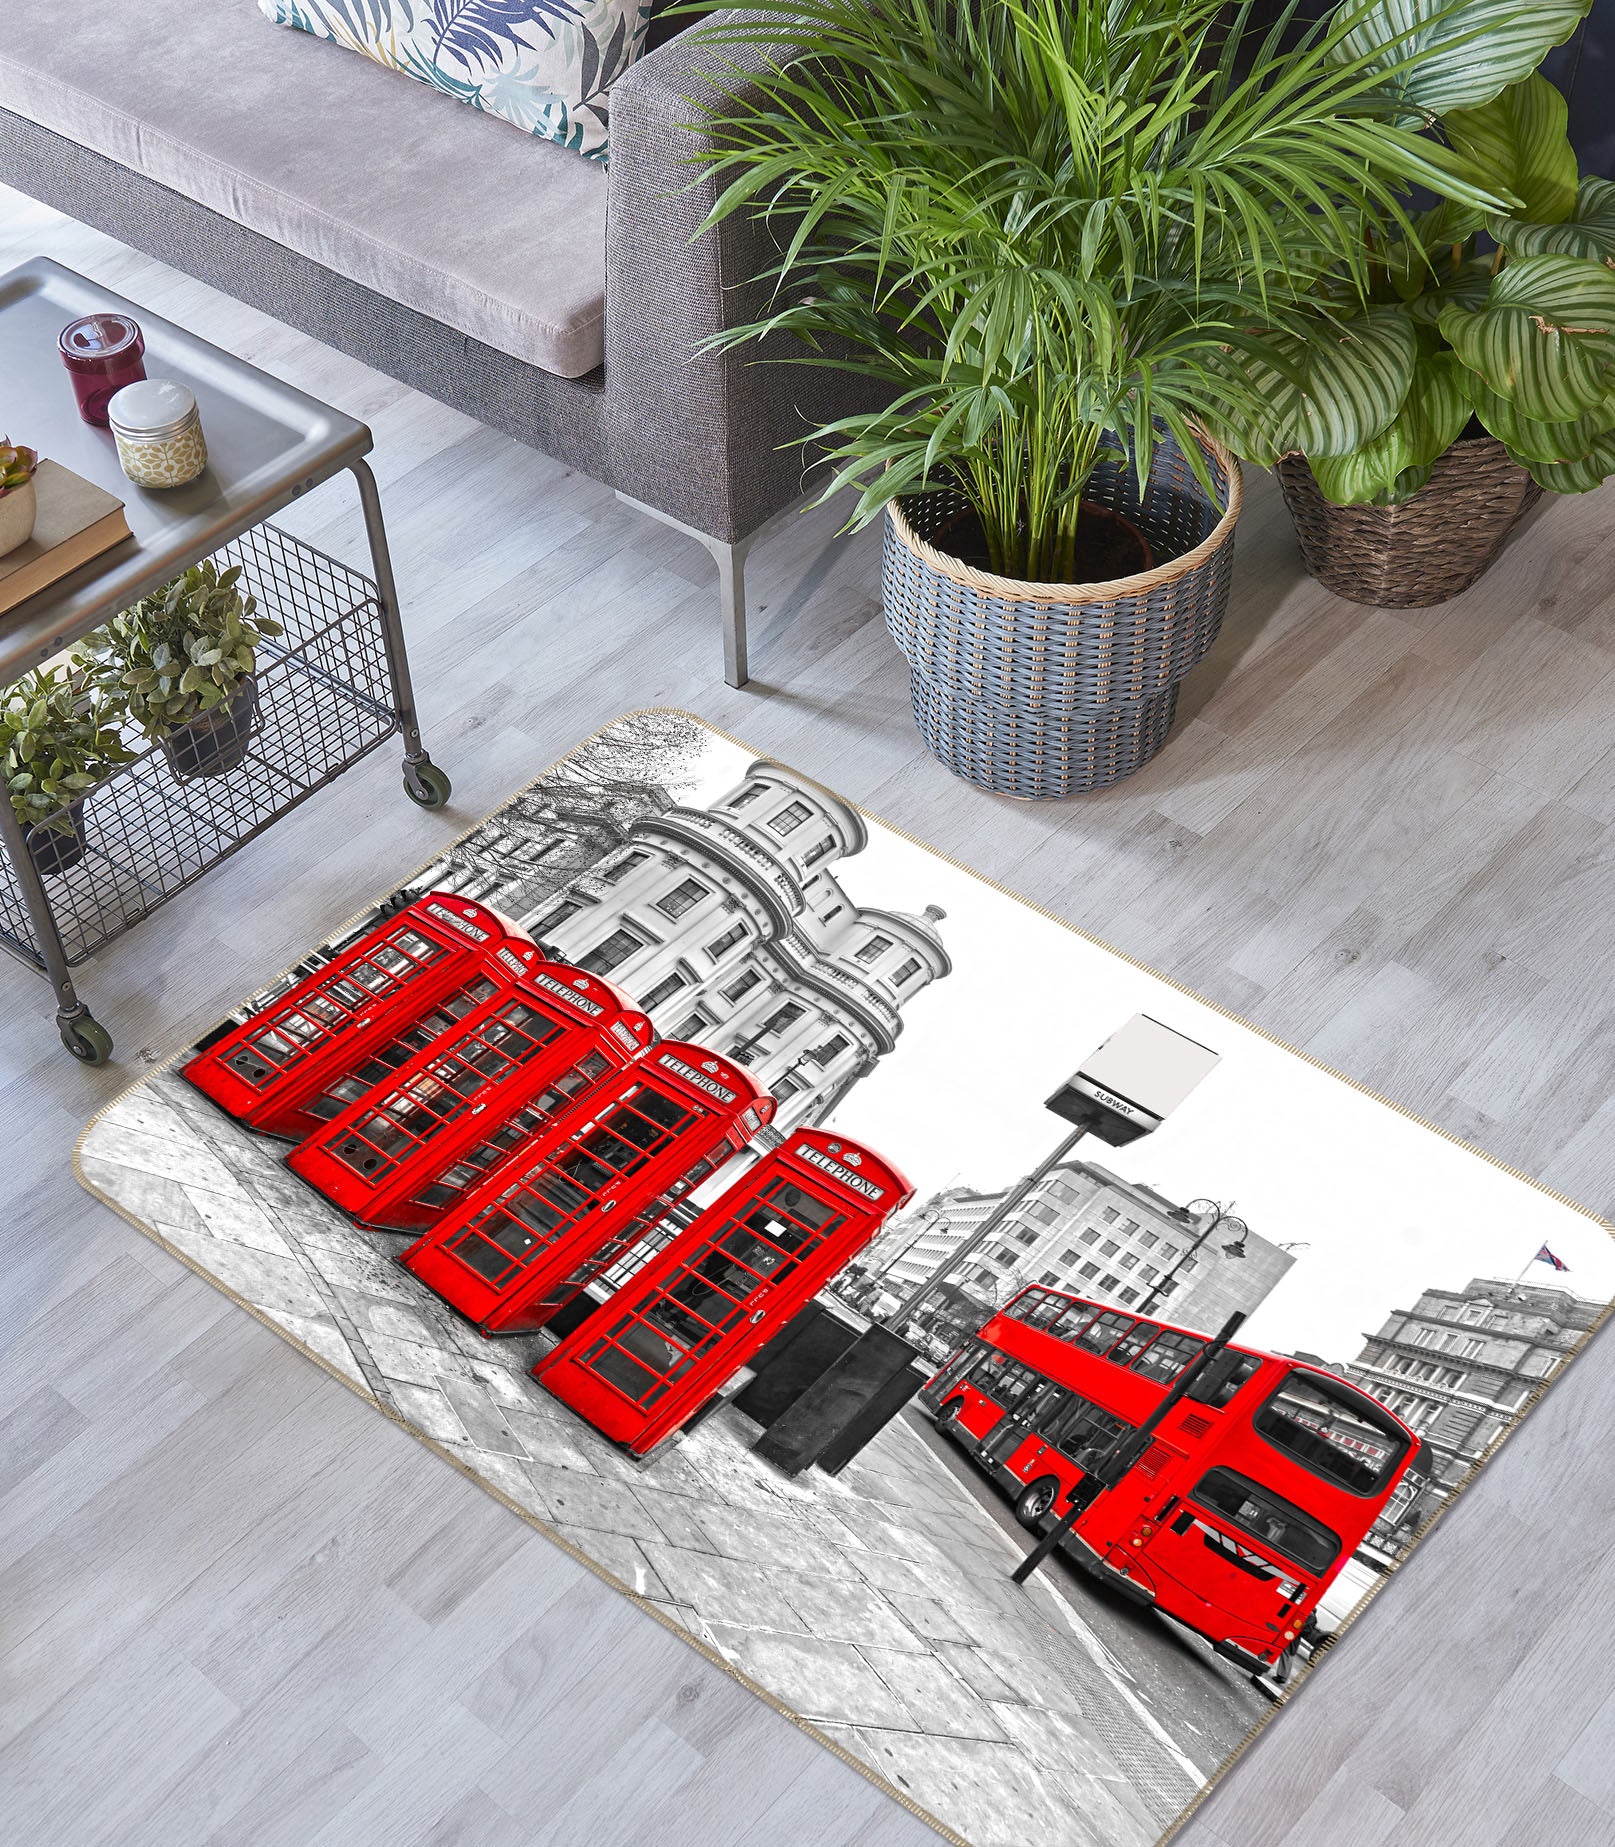 3D Red Phone Booth Bus 68067 Vehicle Non Slip Rug Mat